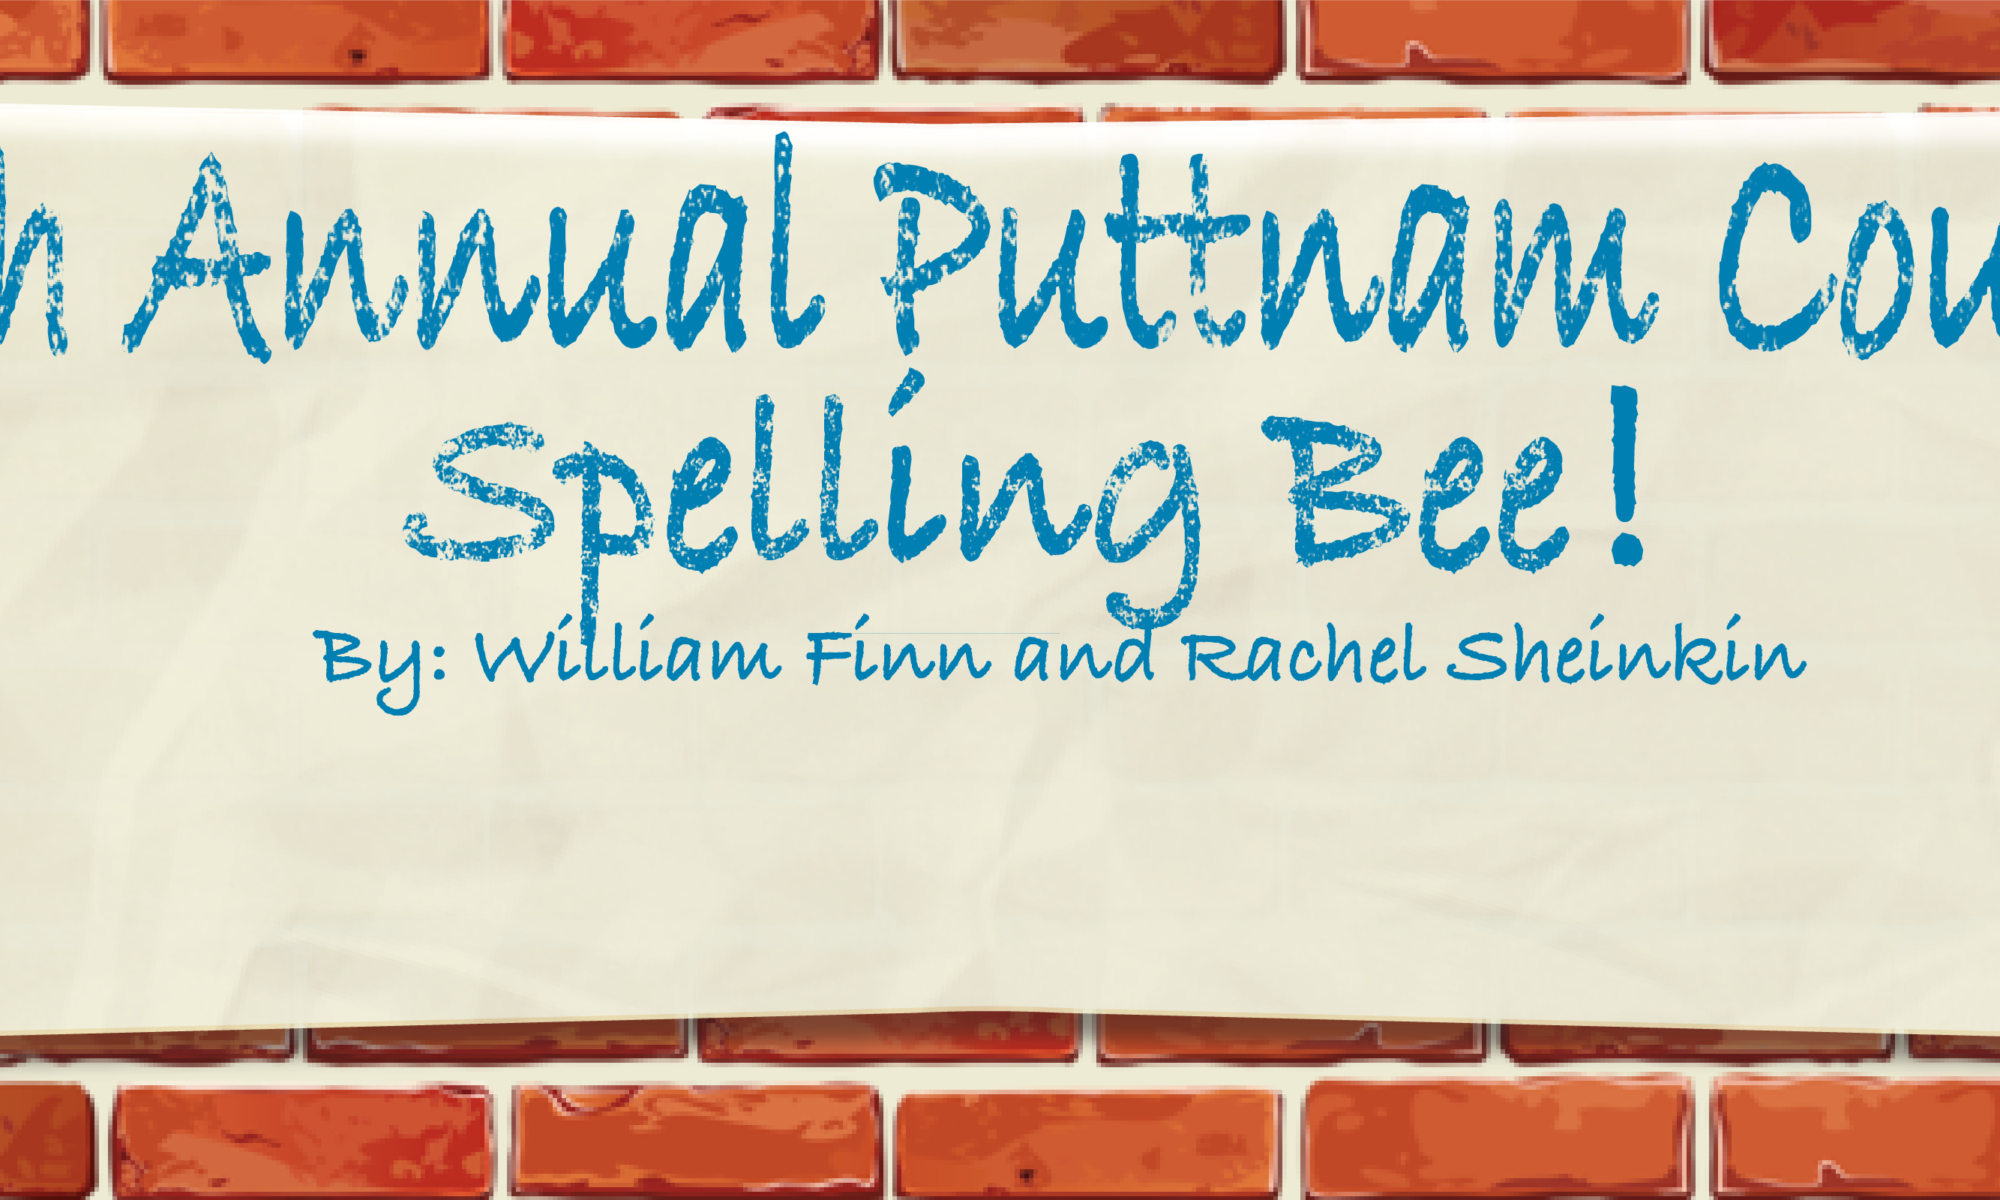 25th-Annual-Putnam-County-Spelling-Bee-Banner